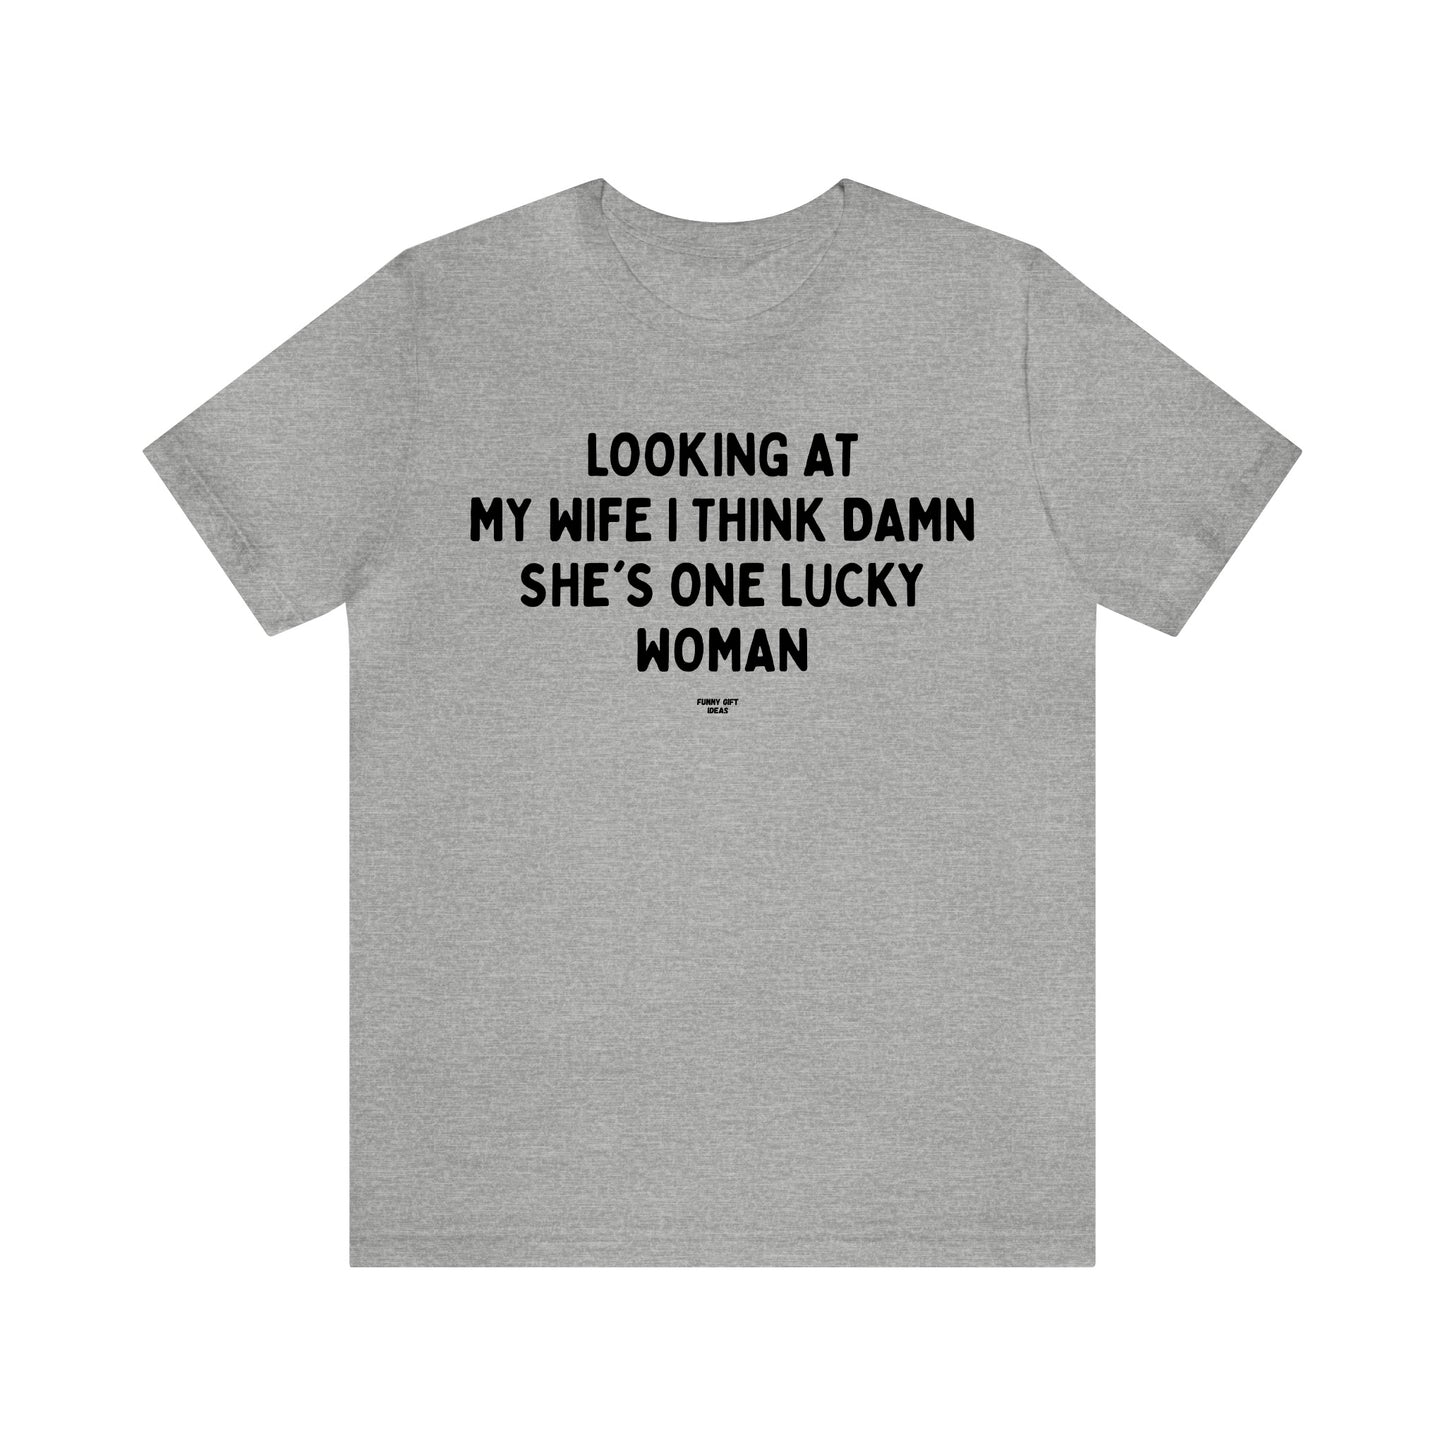 Mens T Shirts - Looking at My Wife I Think Damn She's One Lucky Woman - Funny Men T Shirts